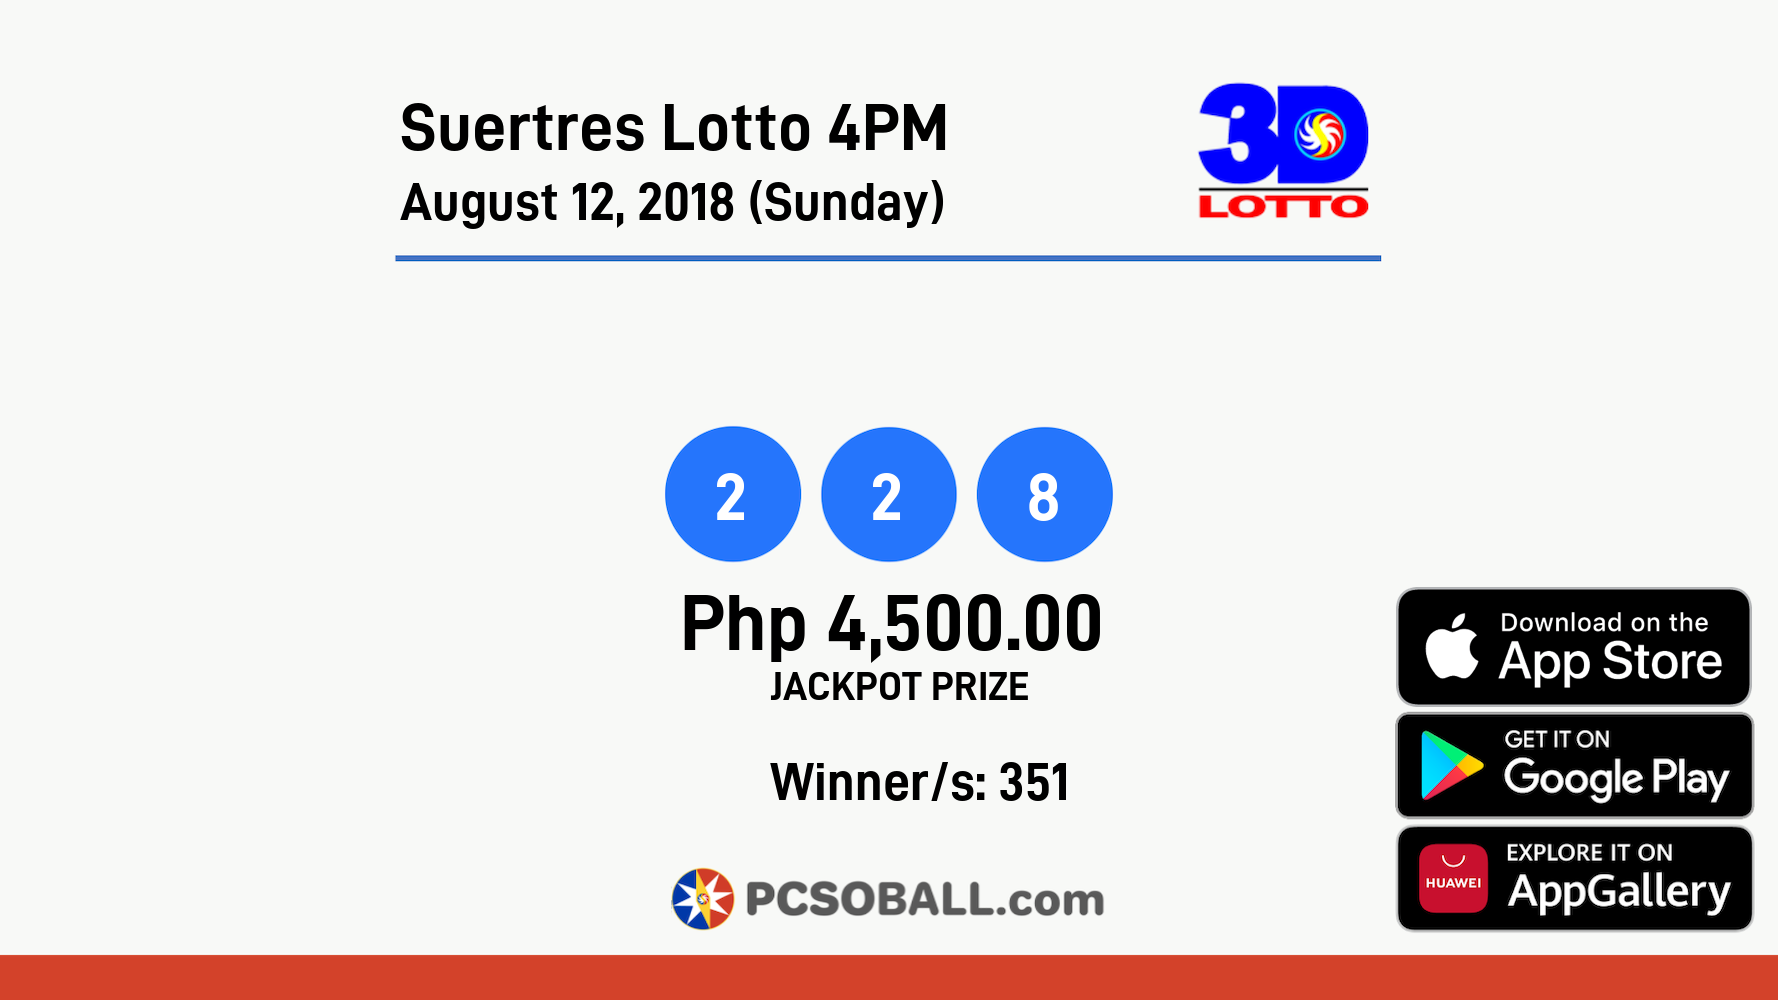 Suertres Lotto 4PM August 12, 2018 (Sunday) Result